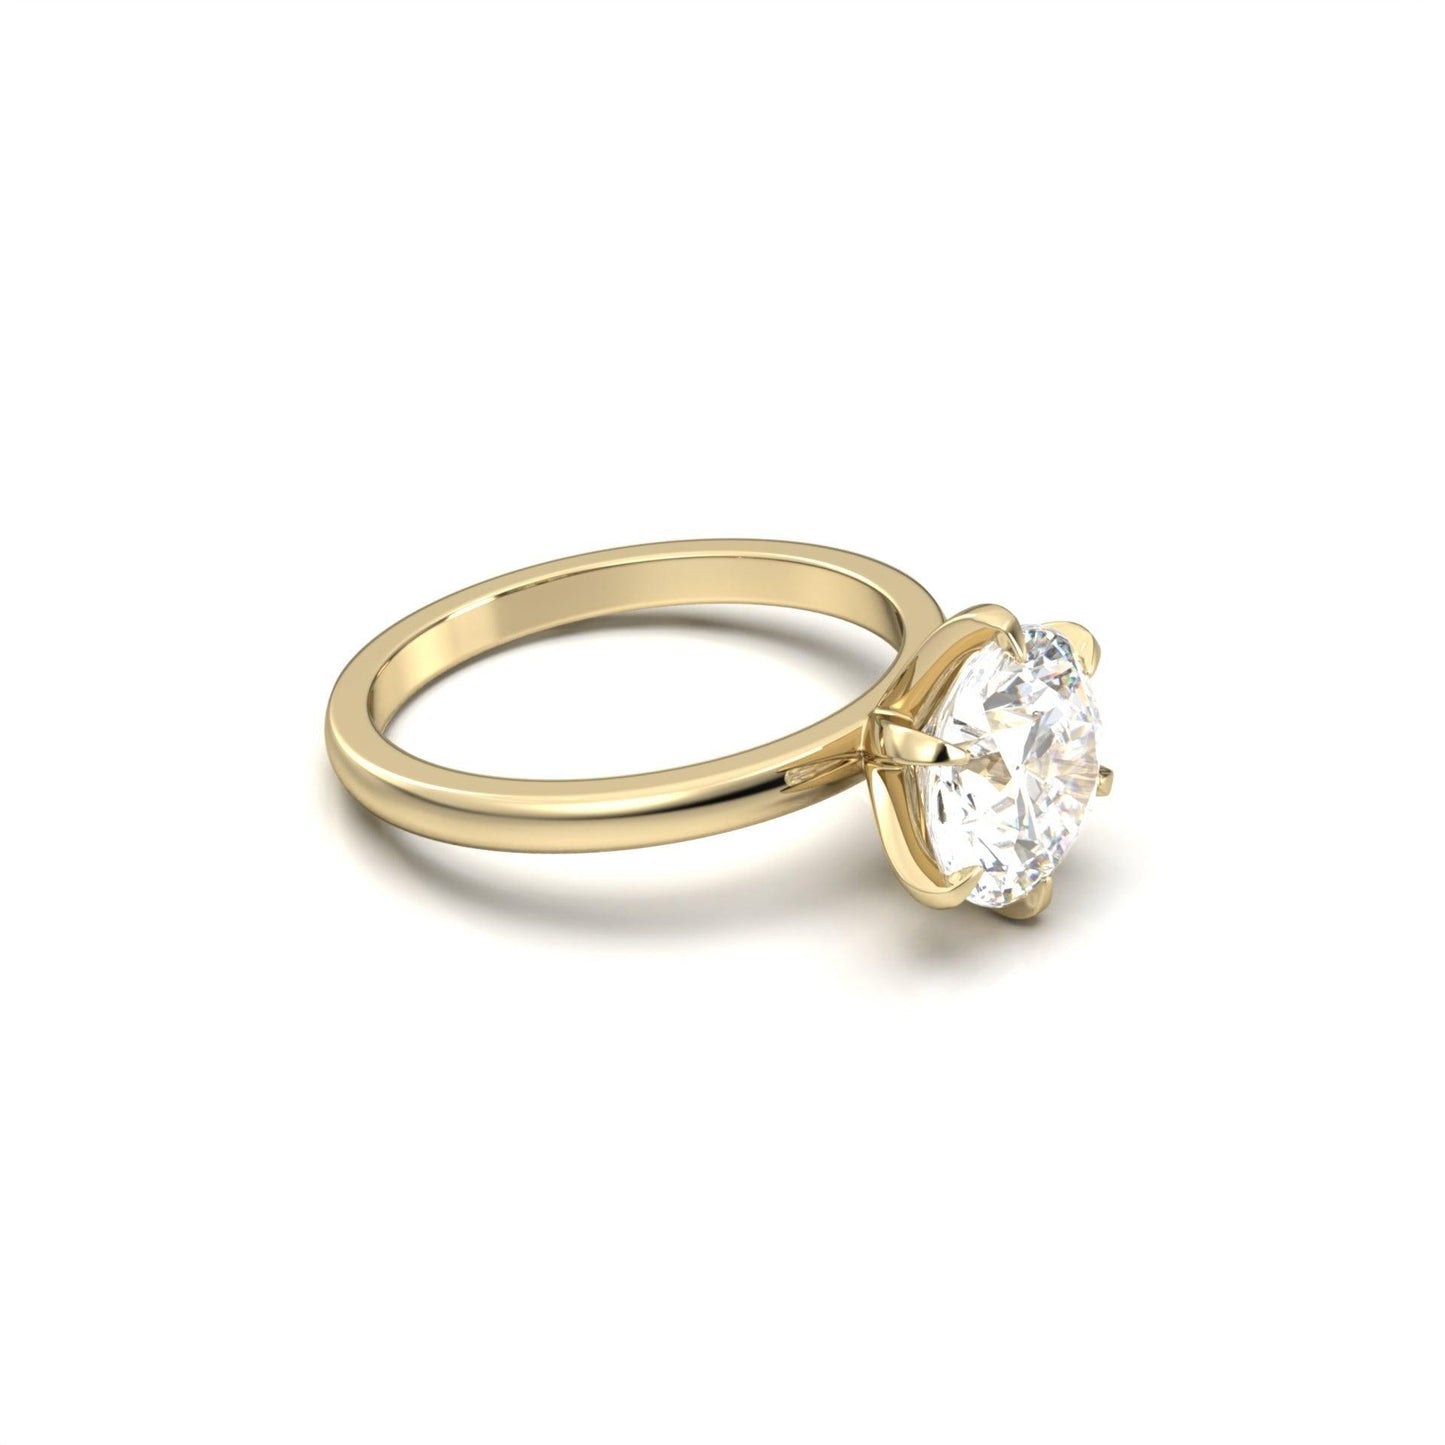 Round Solitaire 6 Claw Setting Moissanite Engagement Ring - moissaniteengagementrings